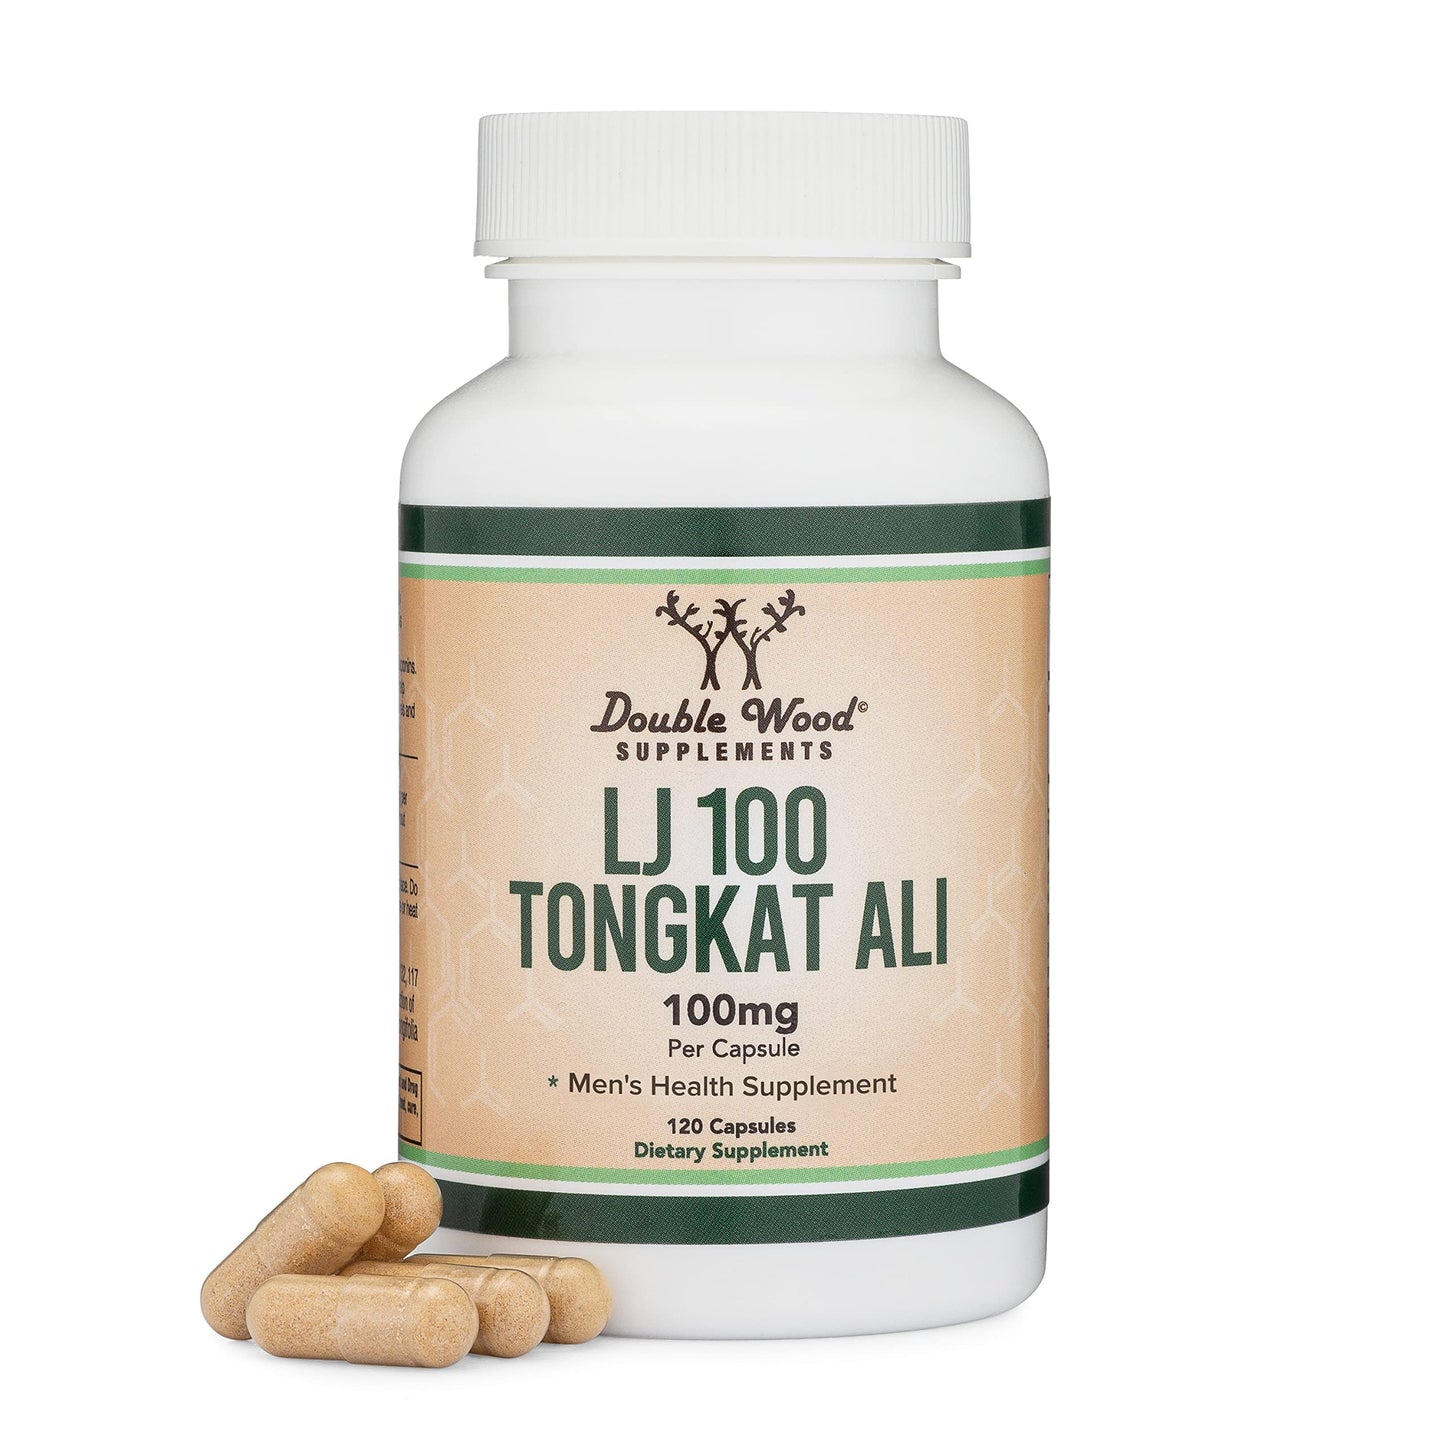 Tongkat Ali for Men (120 Capsules) by Double Wood Supplements